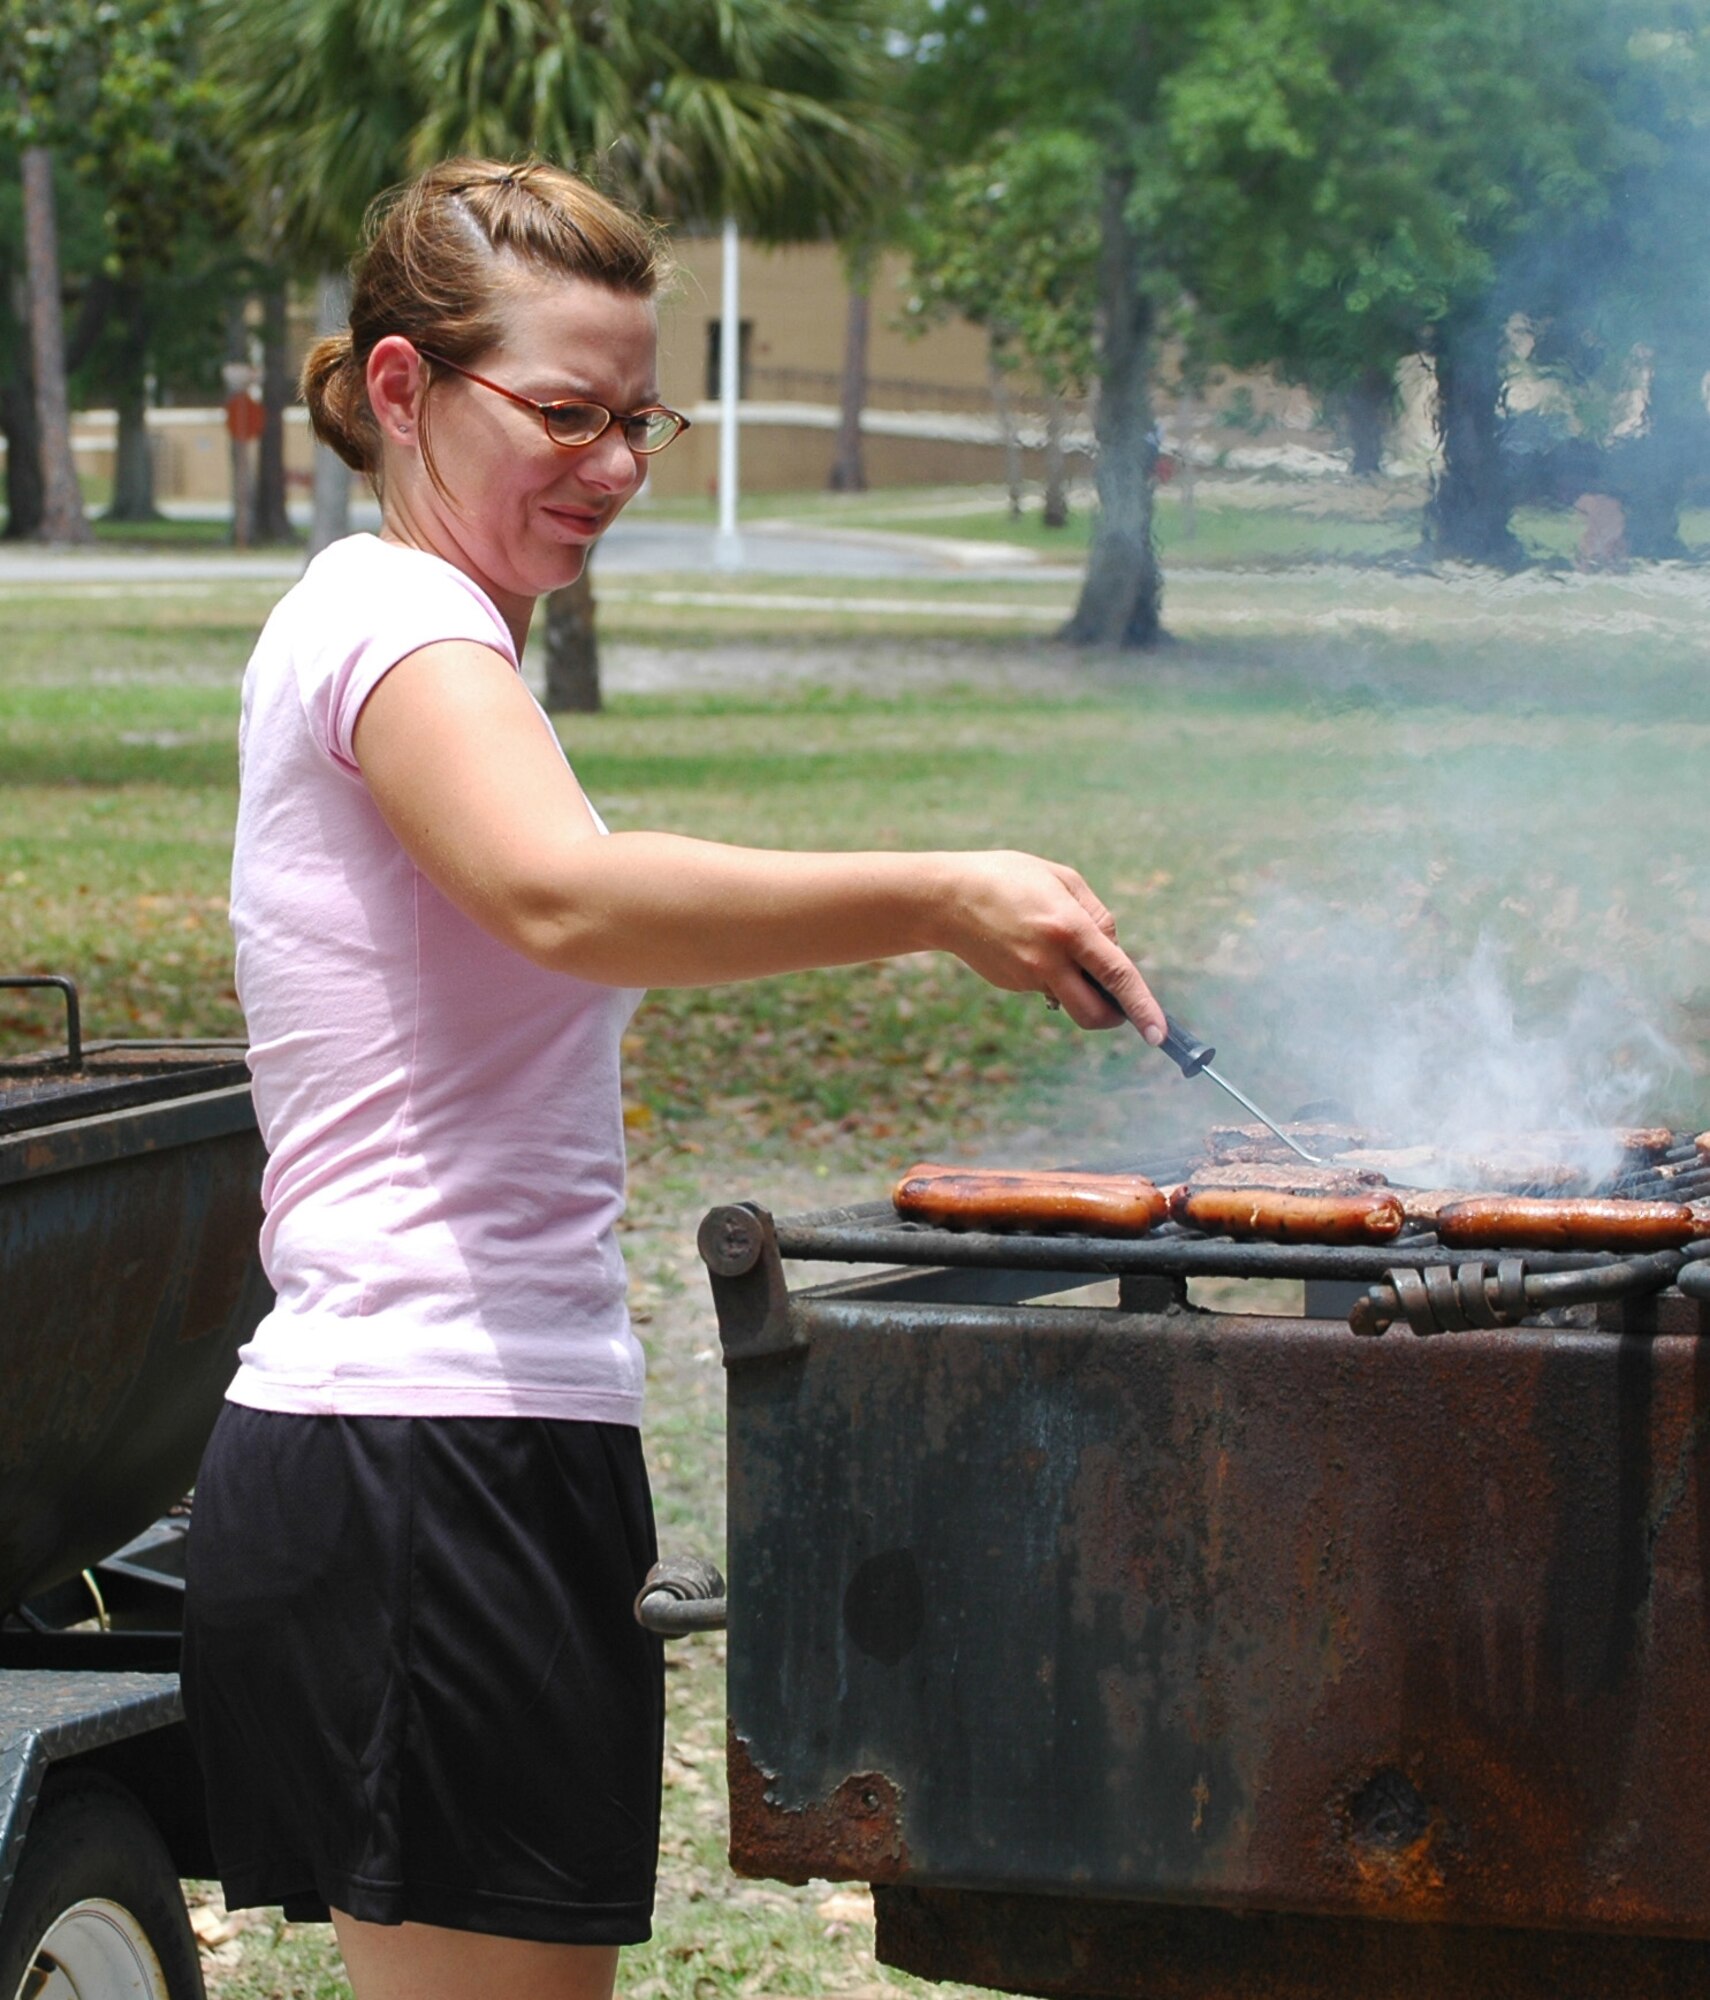 Staff Sgt. Sally Mellen grills hamburgers and hot dogs May 5 at Tyndall Air Force Base, Fla. The lunch was provided to 10 youths involved with the Liberty Unit for Specialized Treatment program from Bristol, Fla. The teenagers were chosen based on their good conduct through the program for a period of at least two months and two weeks. Sergeant Mellen is the 325th Security Forces Squadron command section NCO in charge. (U.S. Air Force photo/Staff Sgt. Joshua Stevens) 
